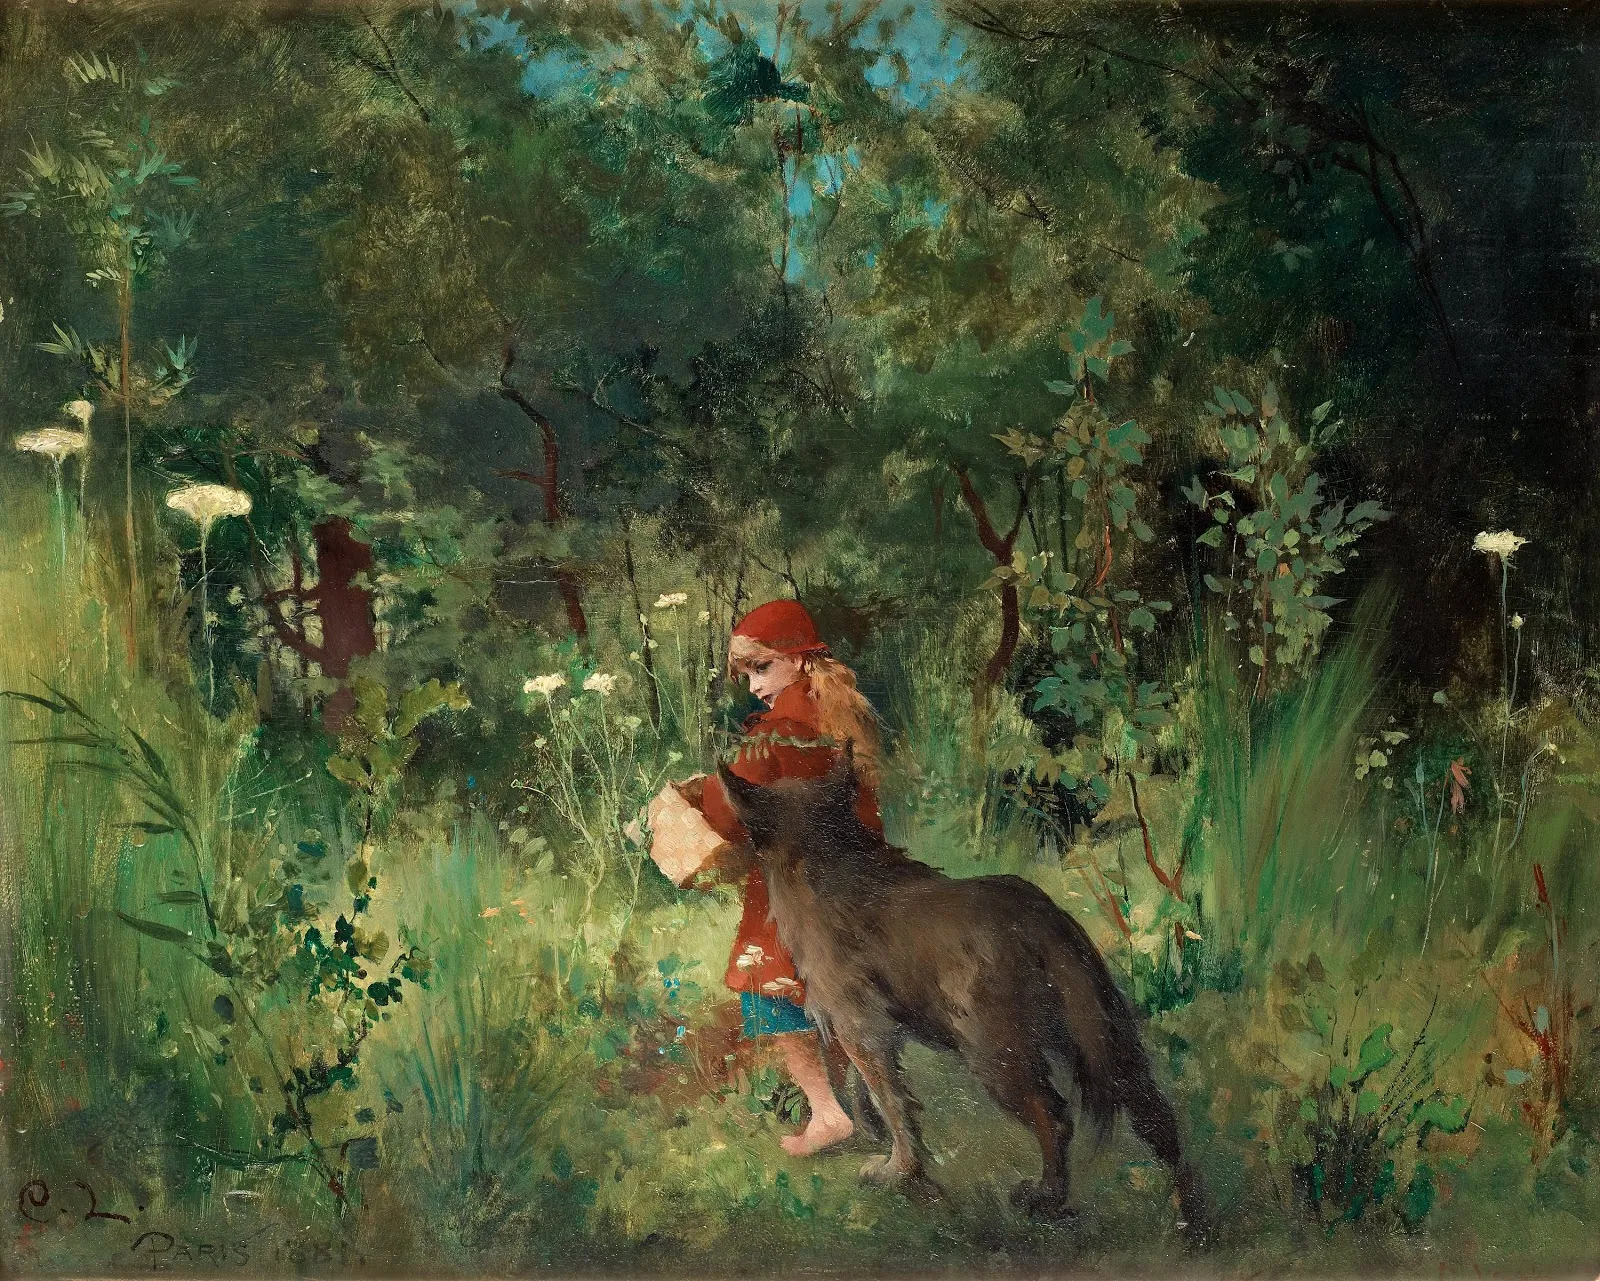 Storytelling blog: In what kind of forest does Little Red Riding Hood meet the wolf?